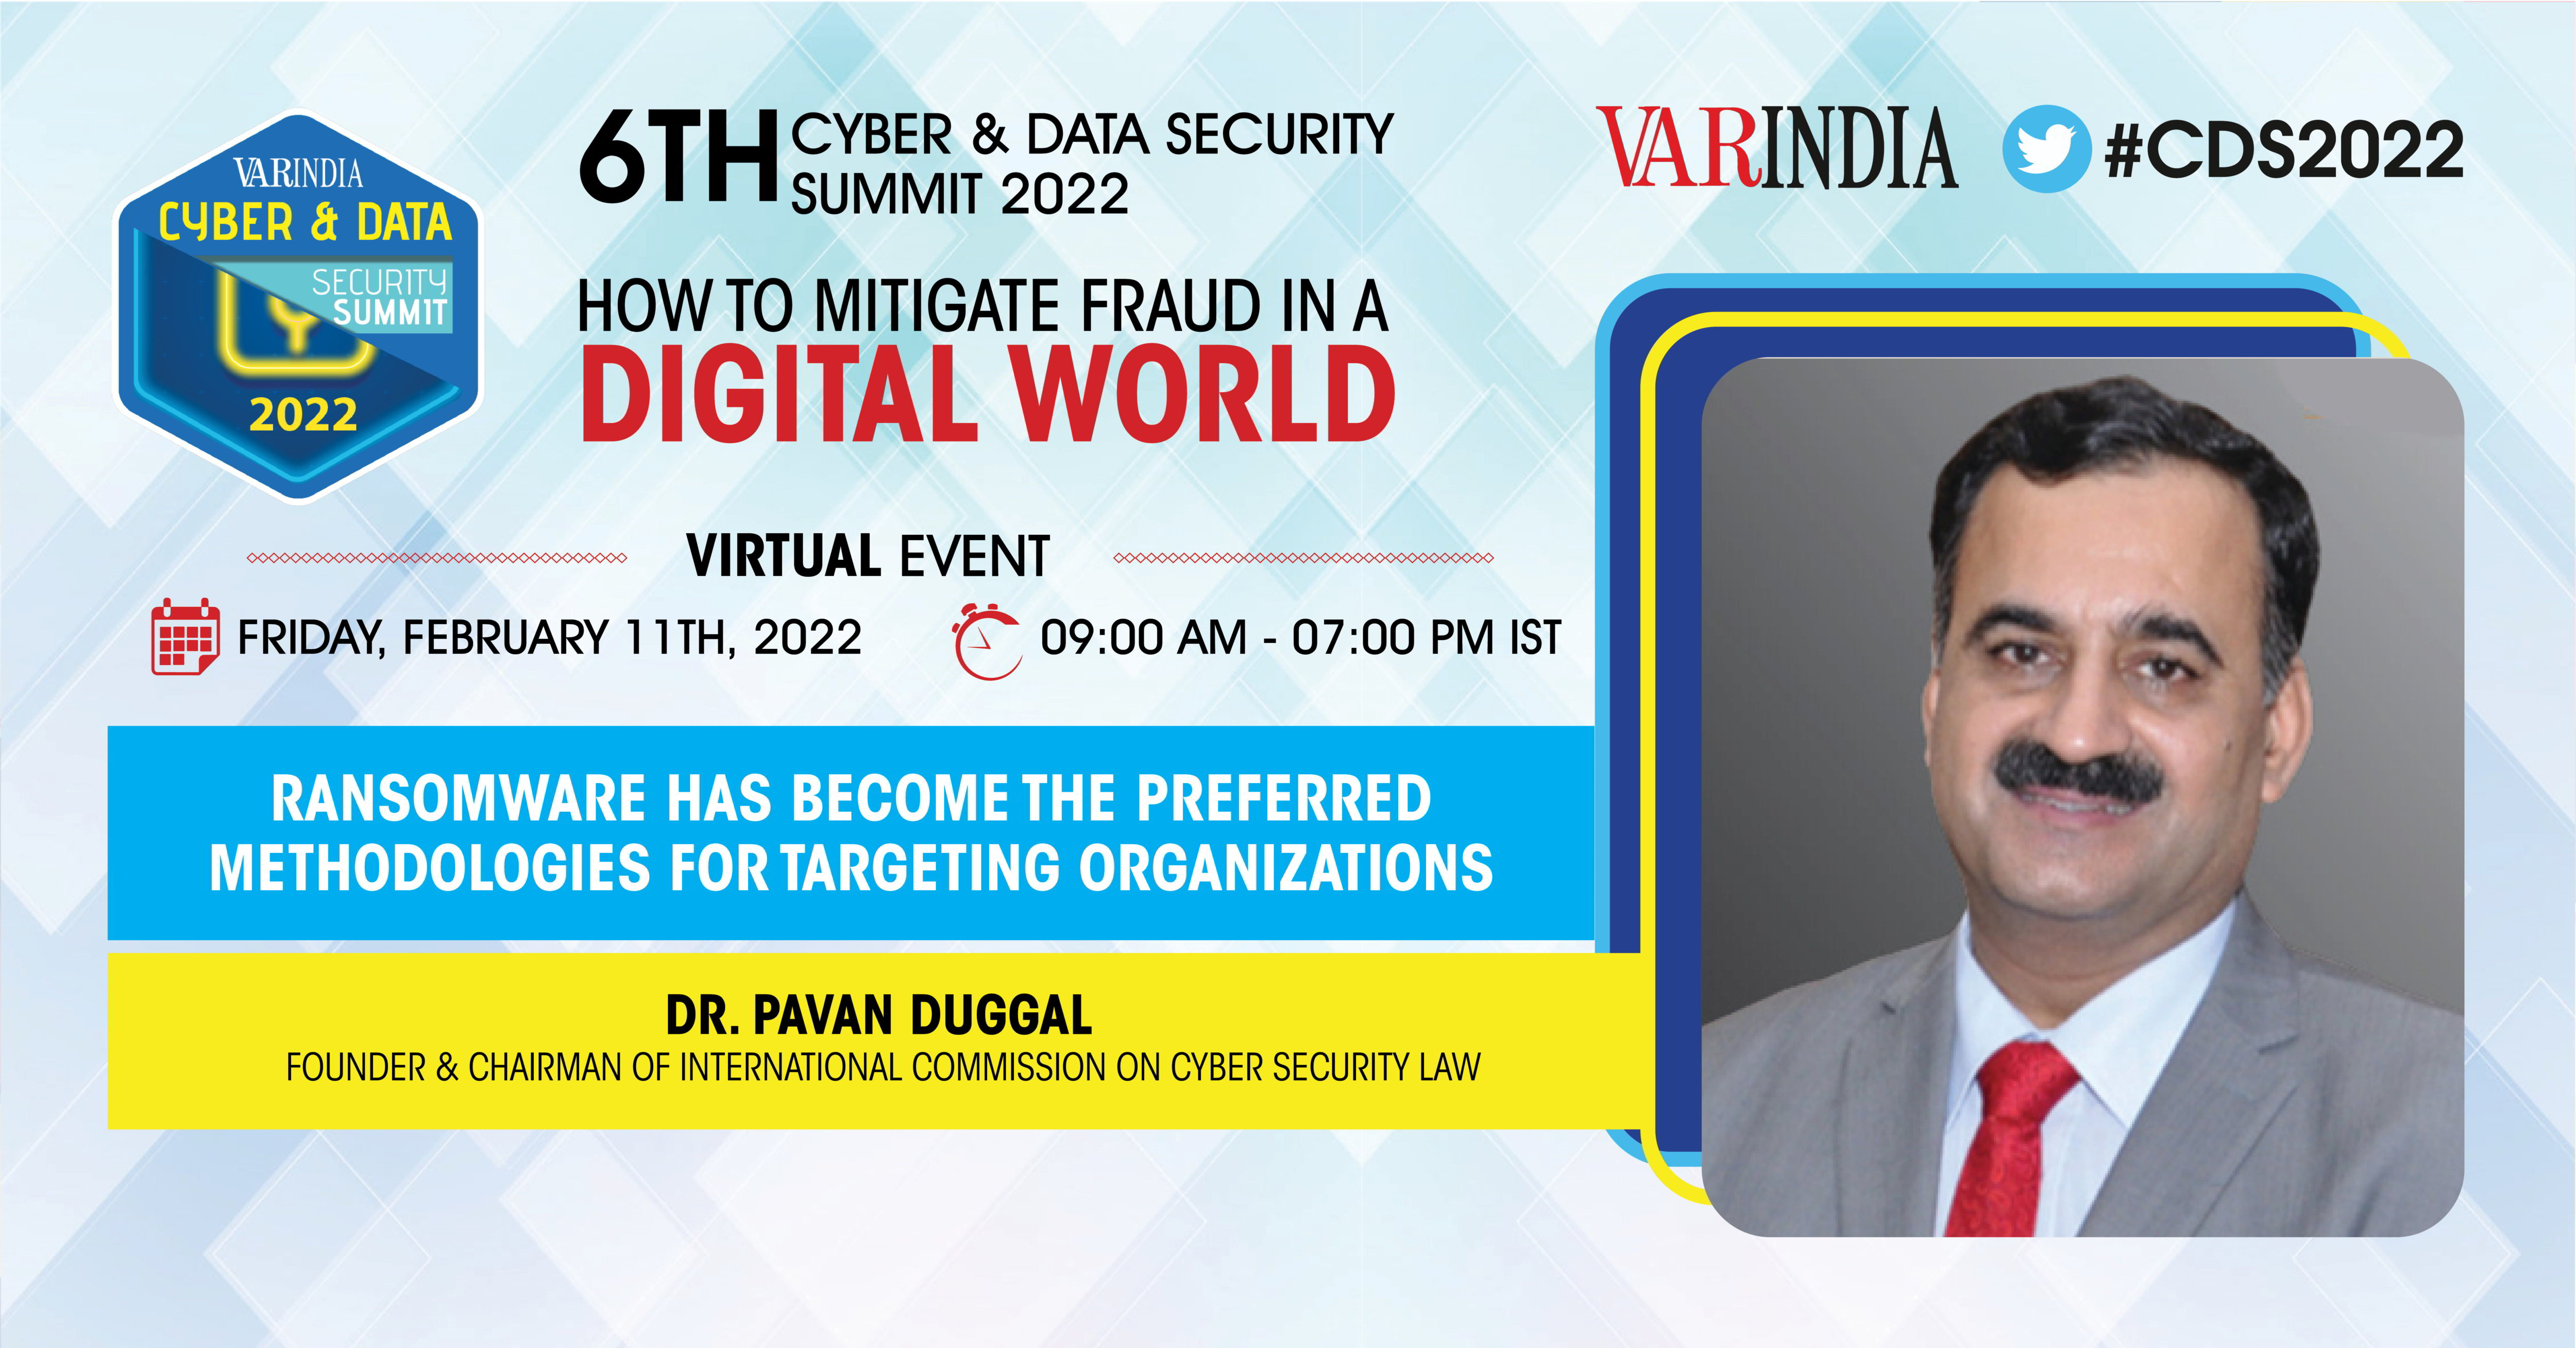 Overview by Cyber Expert Dr. Pavan Duggal, Founder & Chairman of International Commission on Cyber Security Law